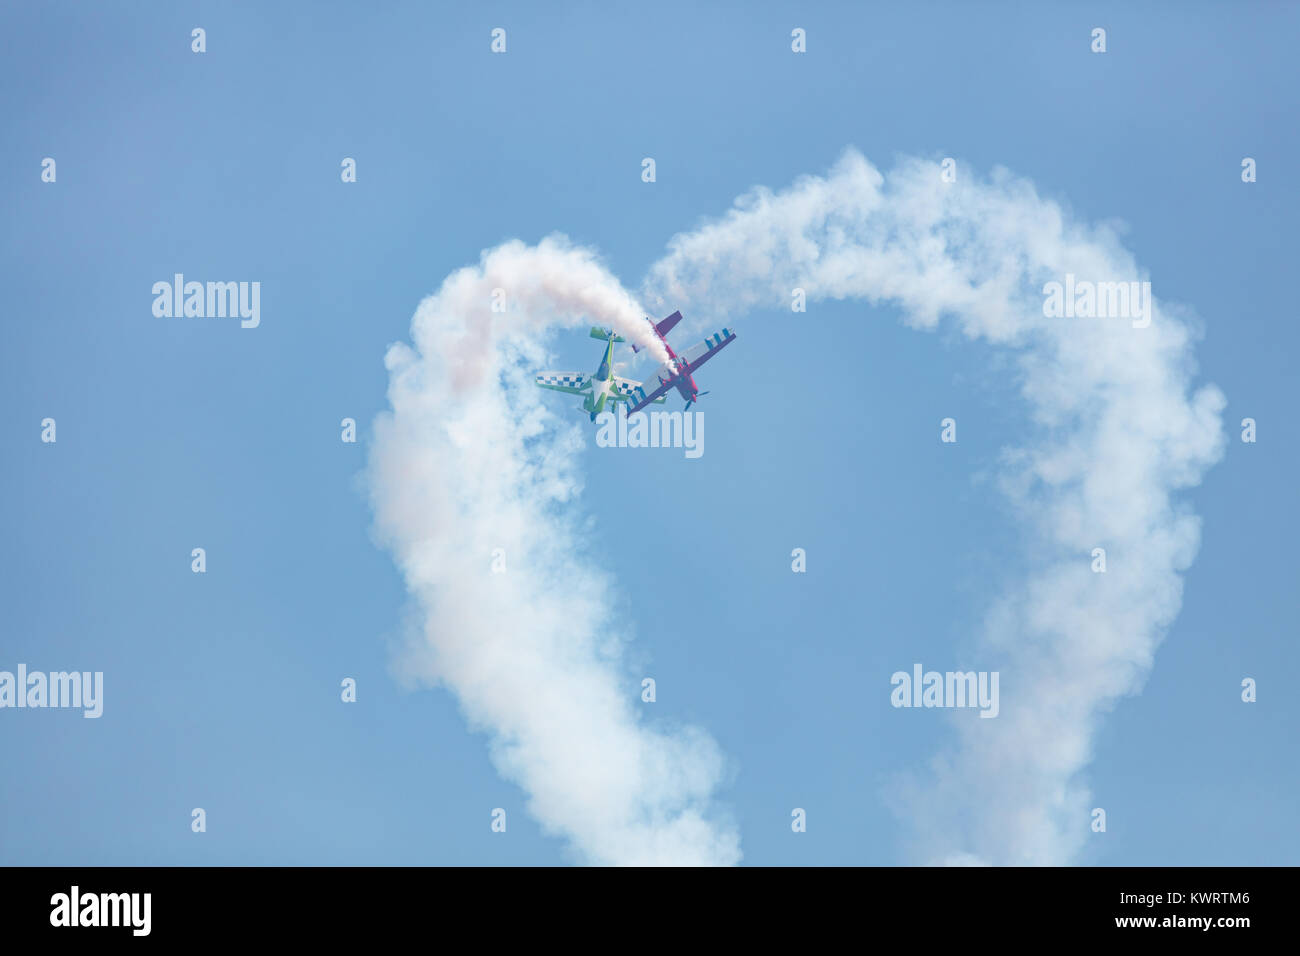 USA, Chicago - August 19: Planes performing  at Chicago Air and Water Show, with smoke to track the high flying planes on August 19, 2017 Stock Photo